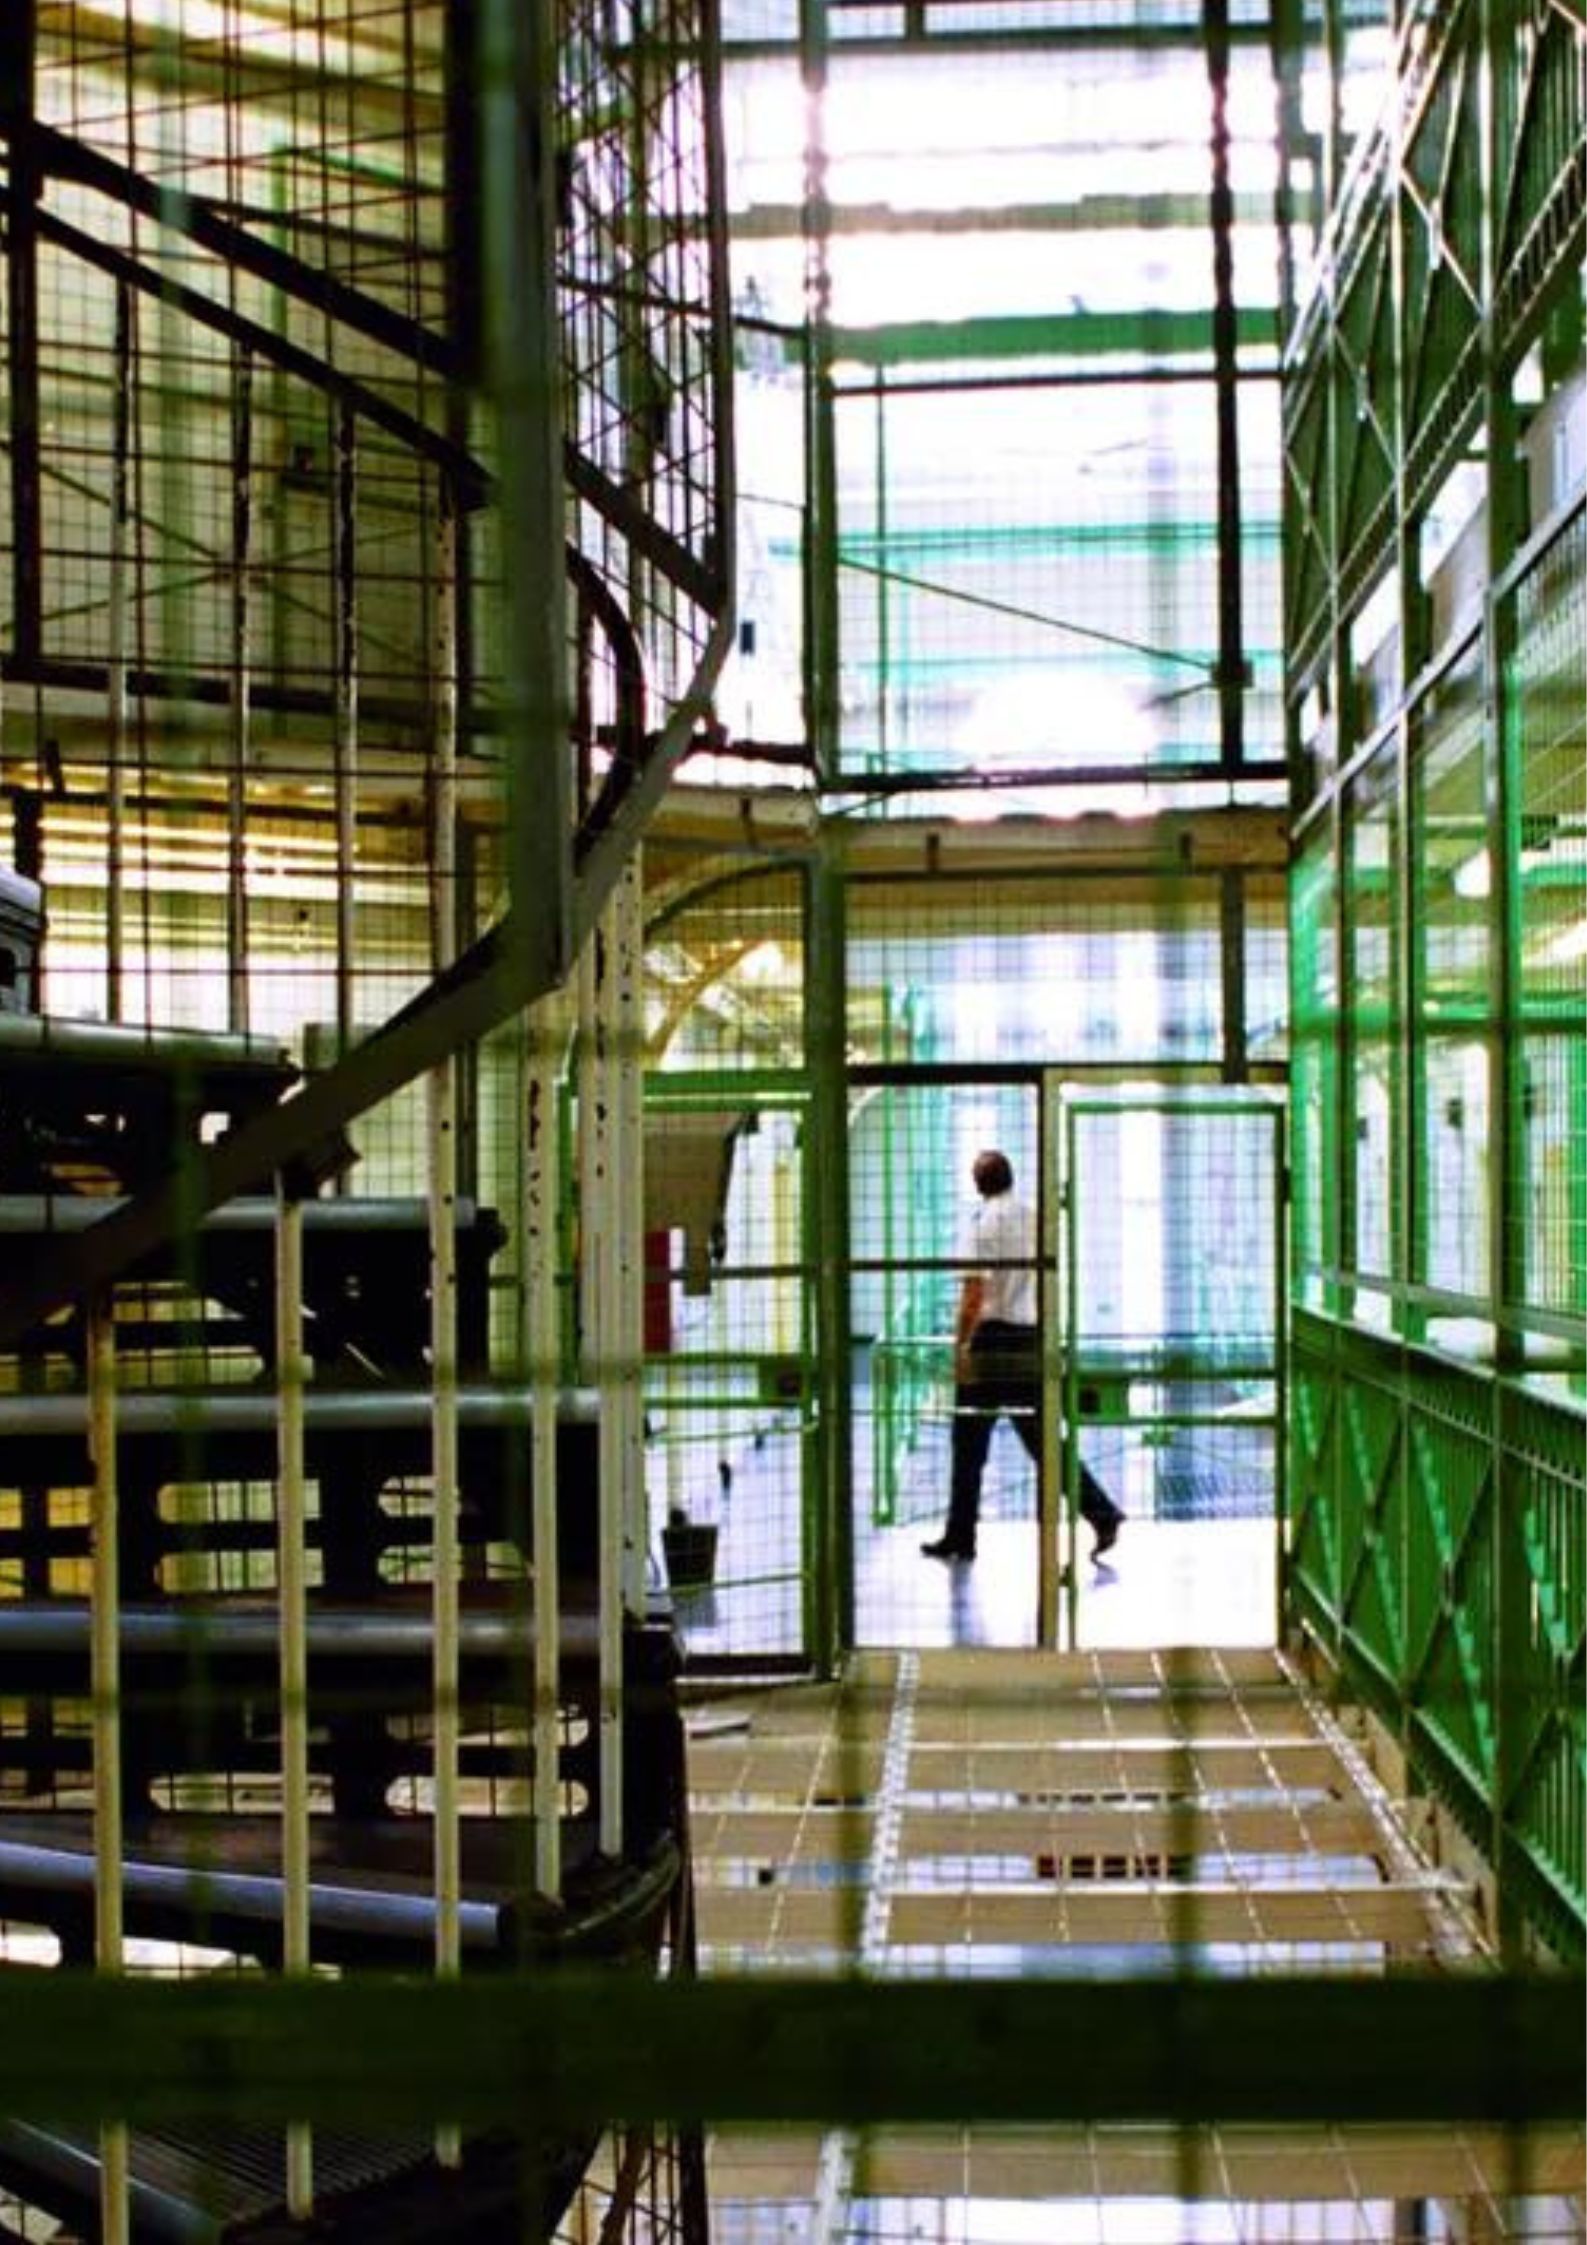 ‘Labour’s plans to tackle prison overcrowding’ - Paper Talk